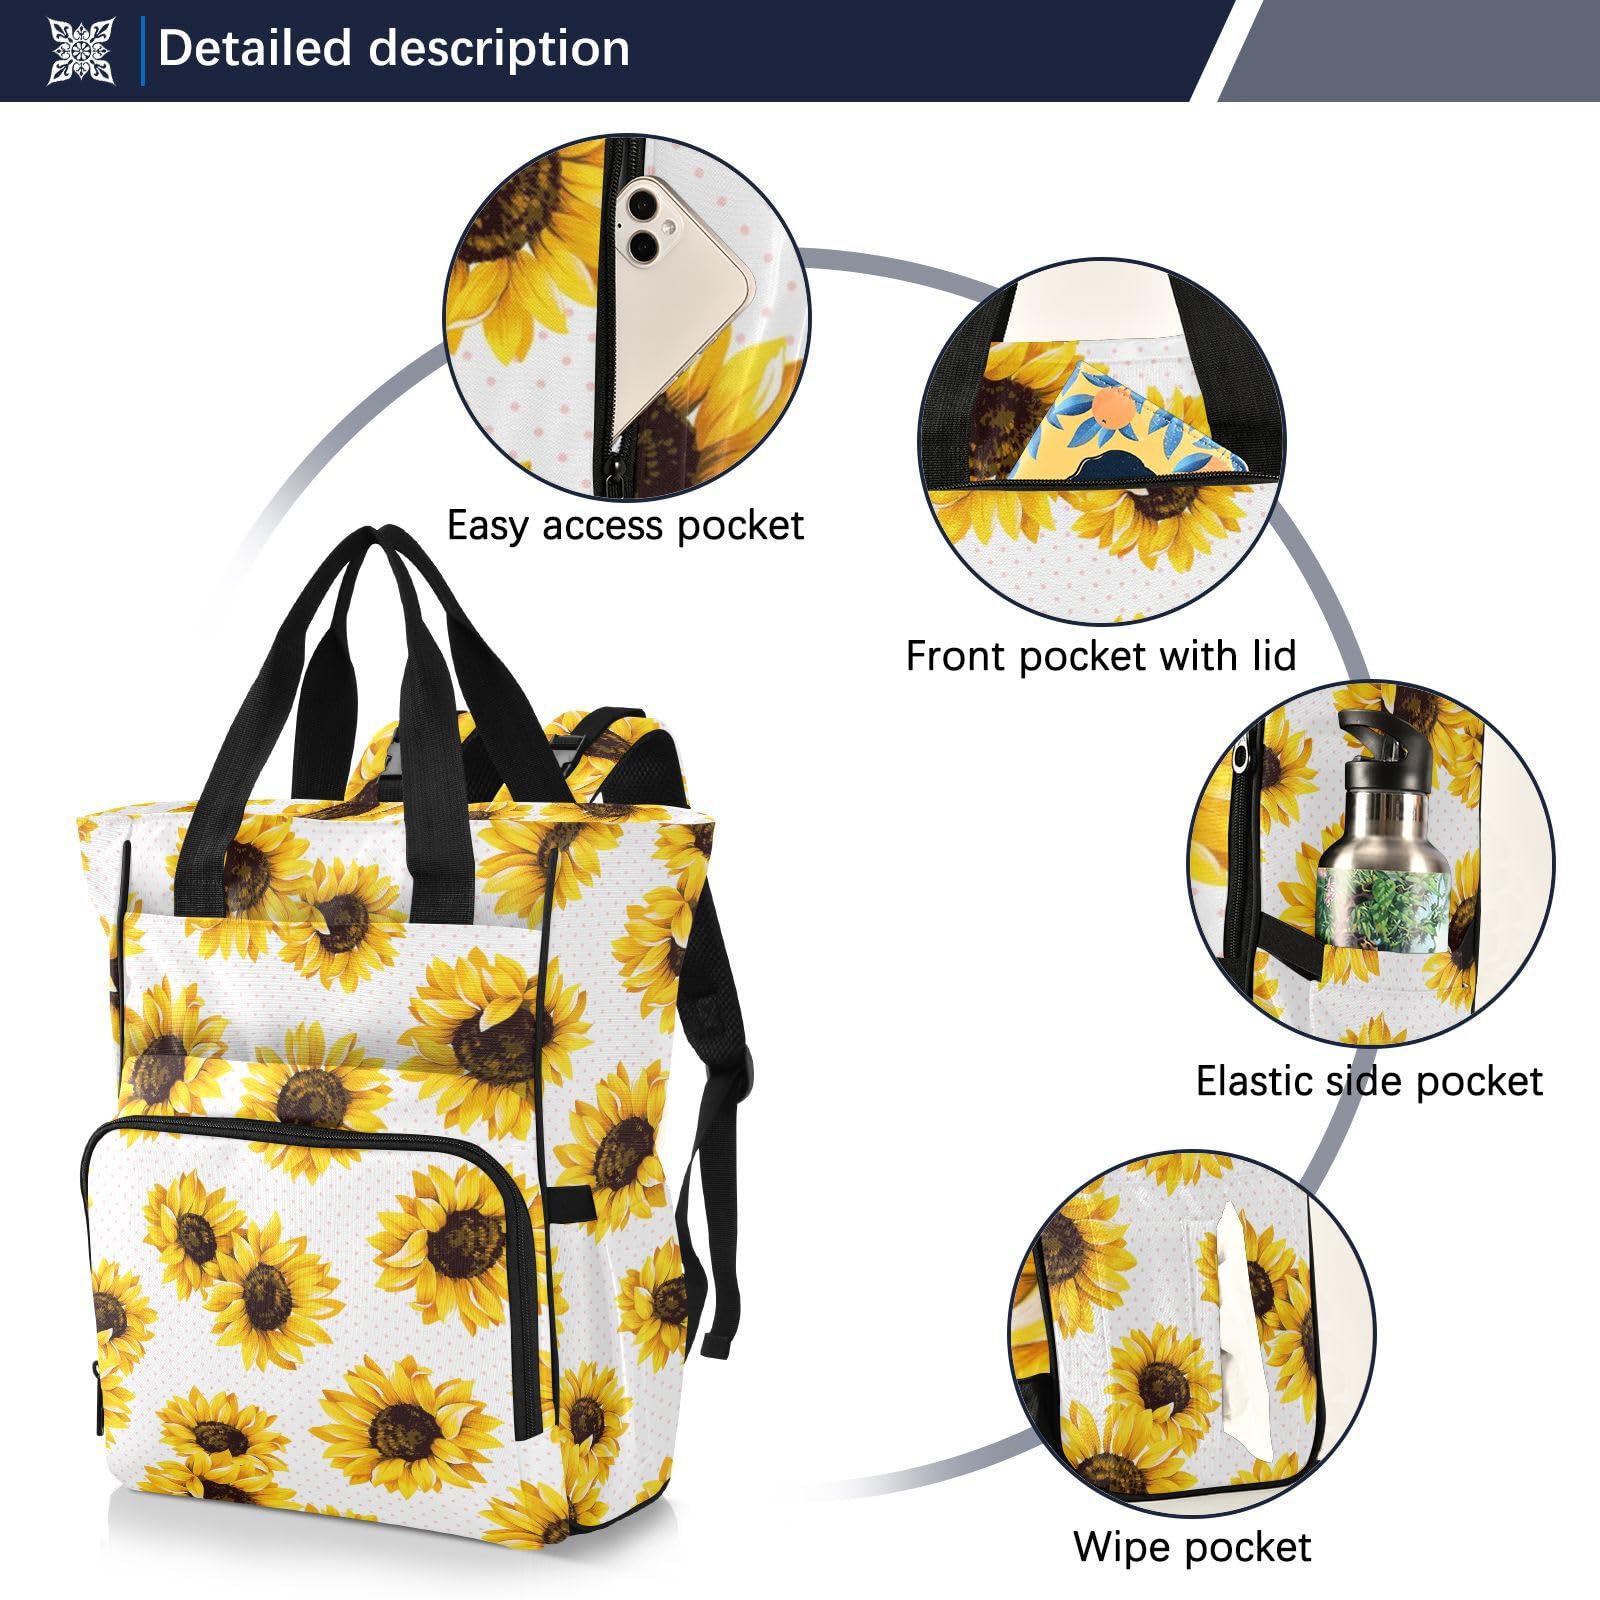 innewgogo Sunflowers Diaper Bag Backpack for Baby Girl Boy Large Capacity Baby Changing Totes with Three Pockets Multifunction Maternity Travel Bag for Playing Shopping Travelling